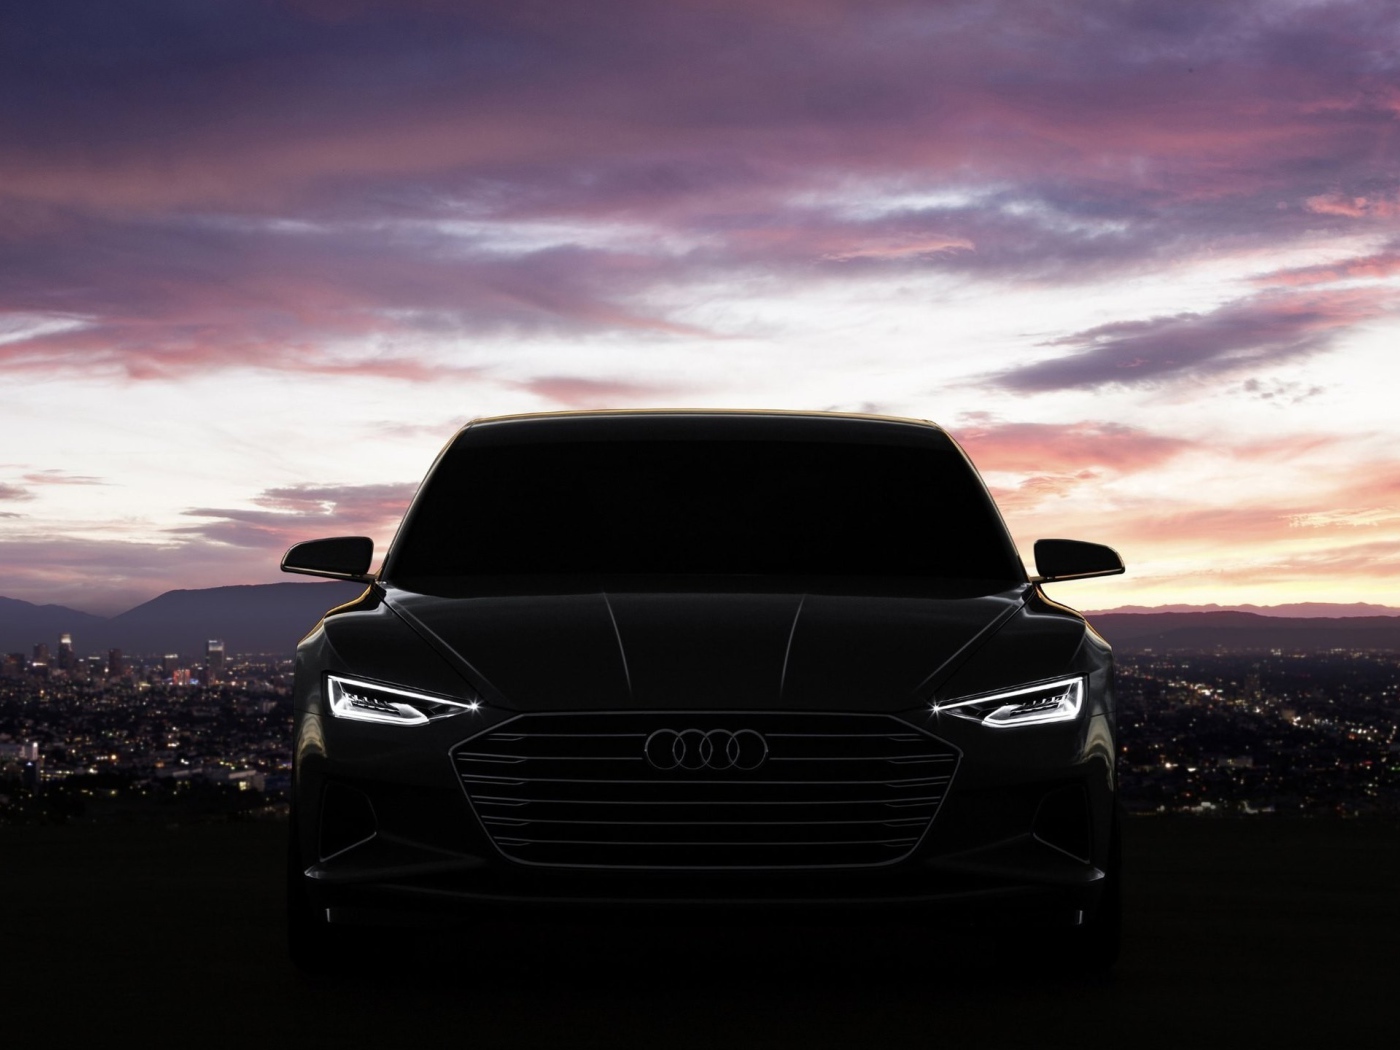 Silhouette black Audi Prologue on city background